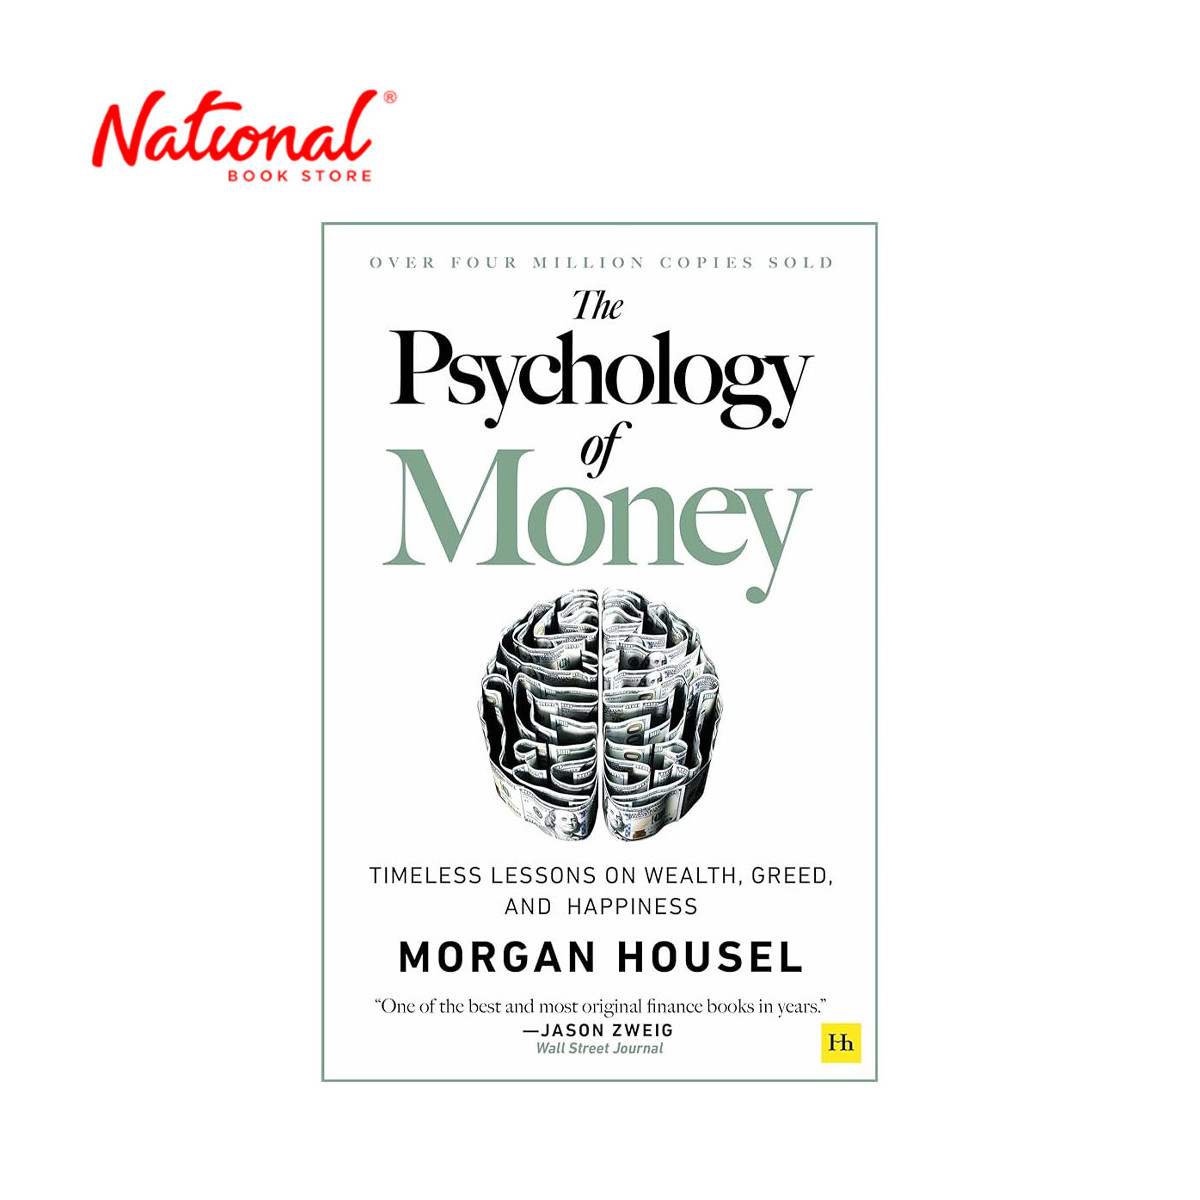 The Psychology of Money by Morgan Housel - Trade Paperback - Finance & Investing - Non-Fiction